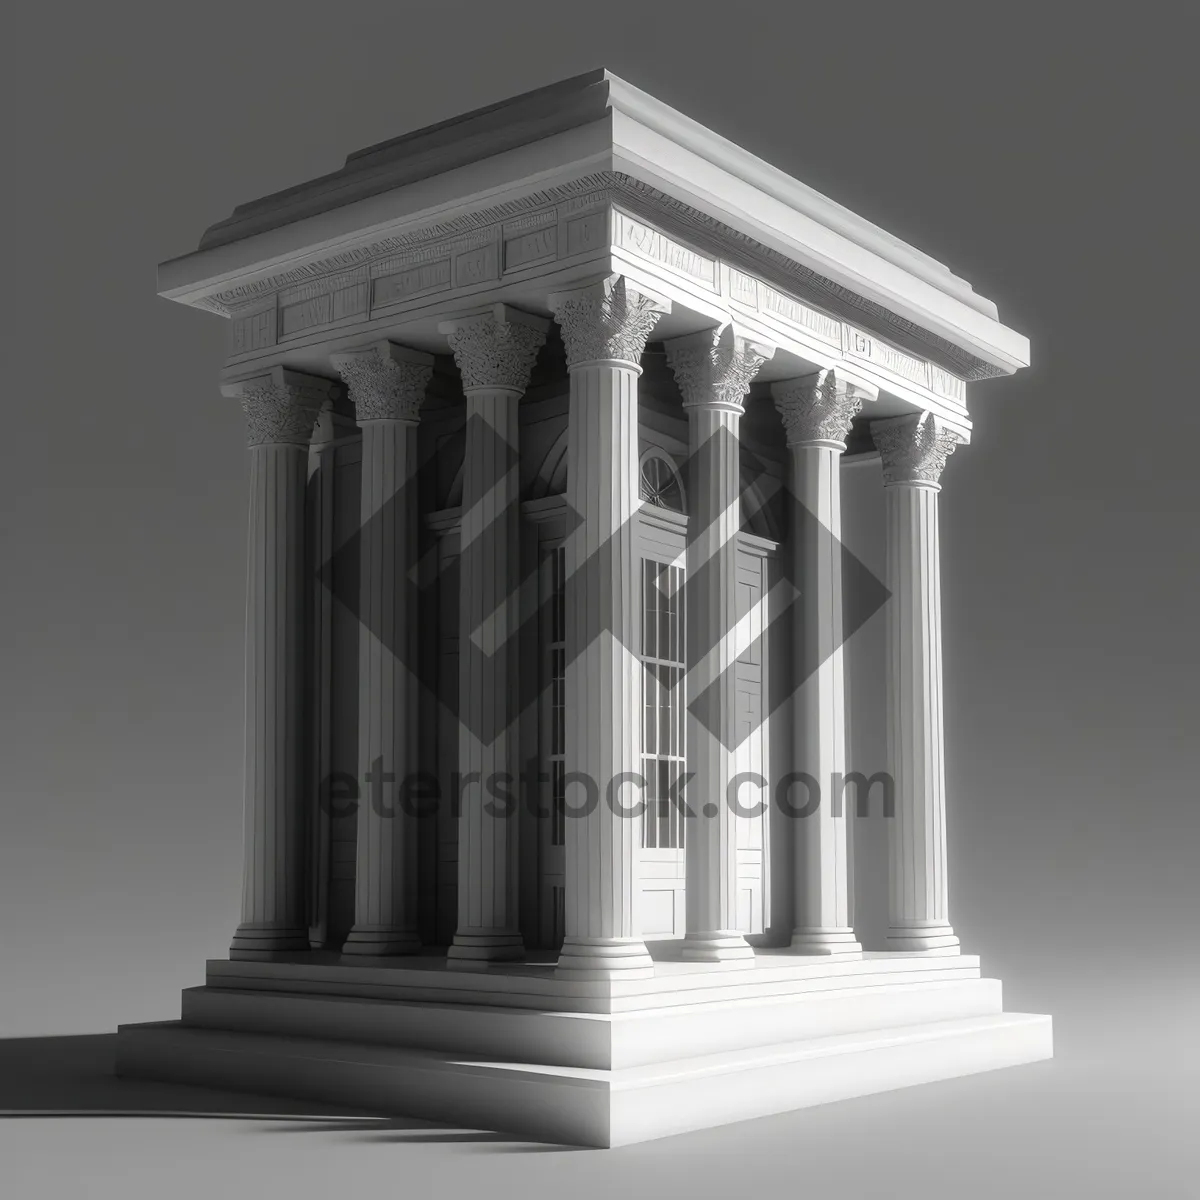 Picture of Classical Marble Columns in Historic City